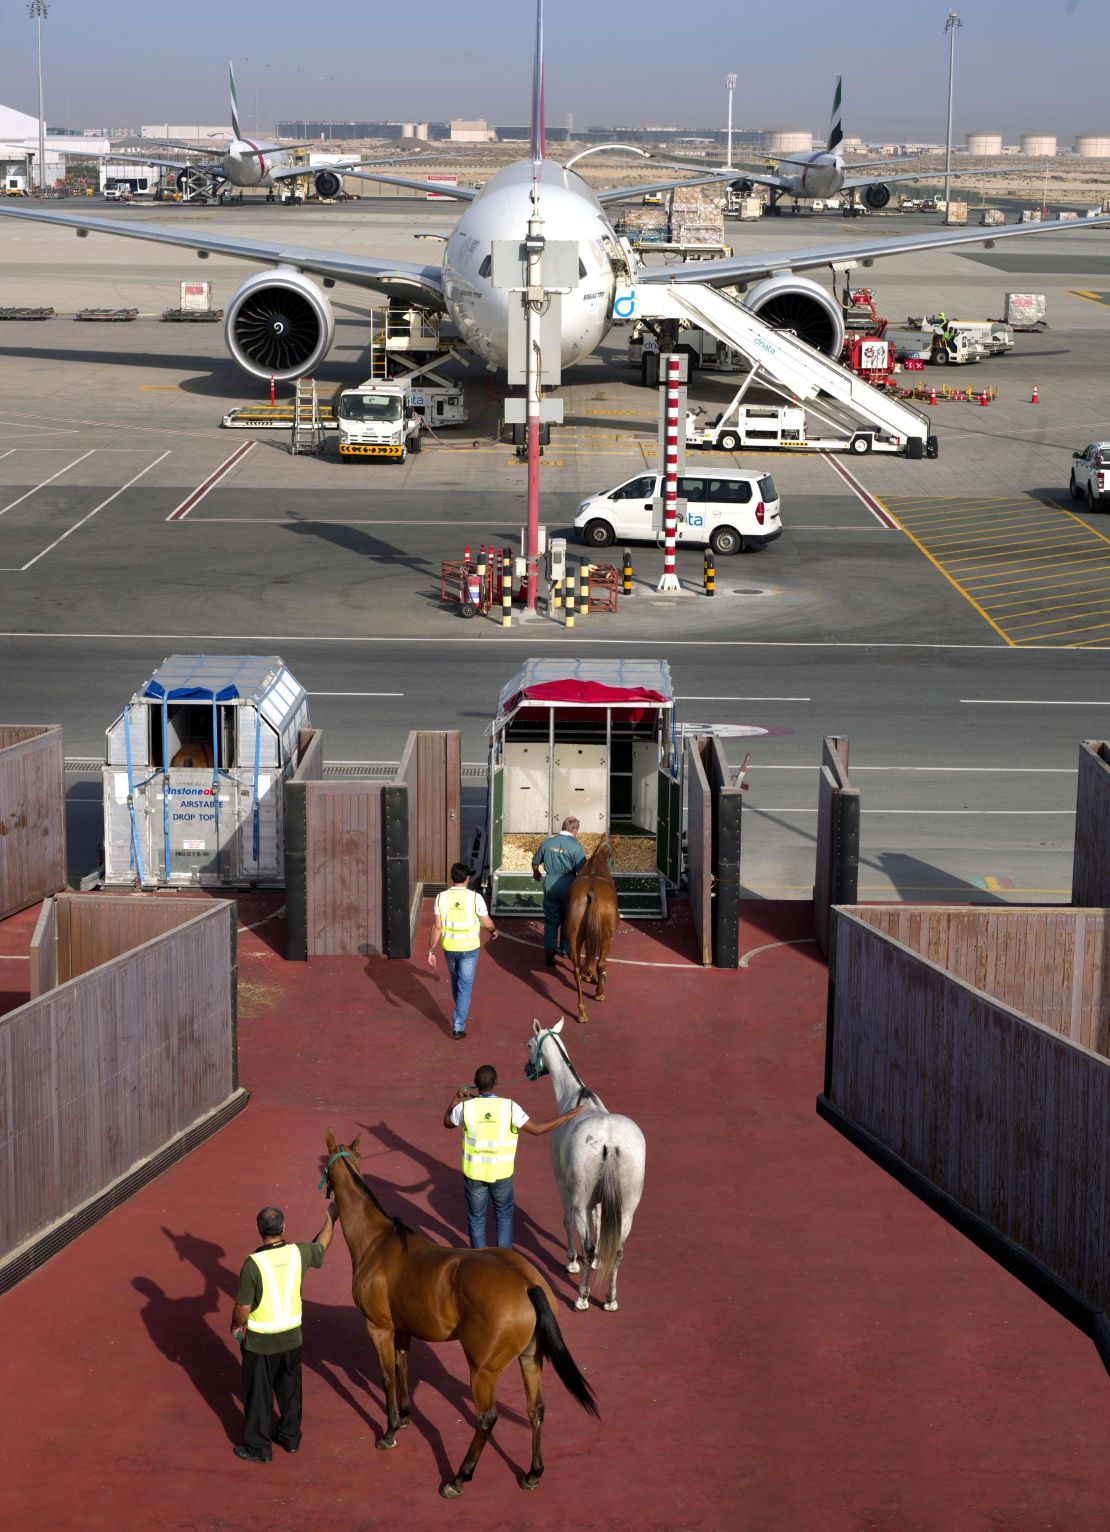 Emirates Skycargo has been transporting champion horses from across the world to the Dubai World Cup and Carnival races since 2002.